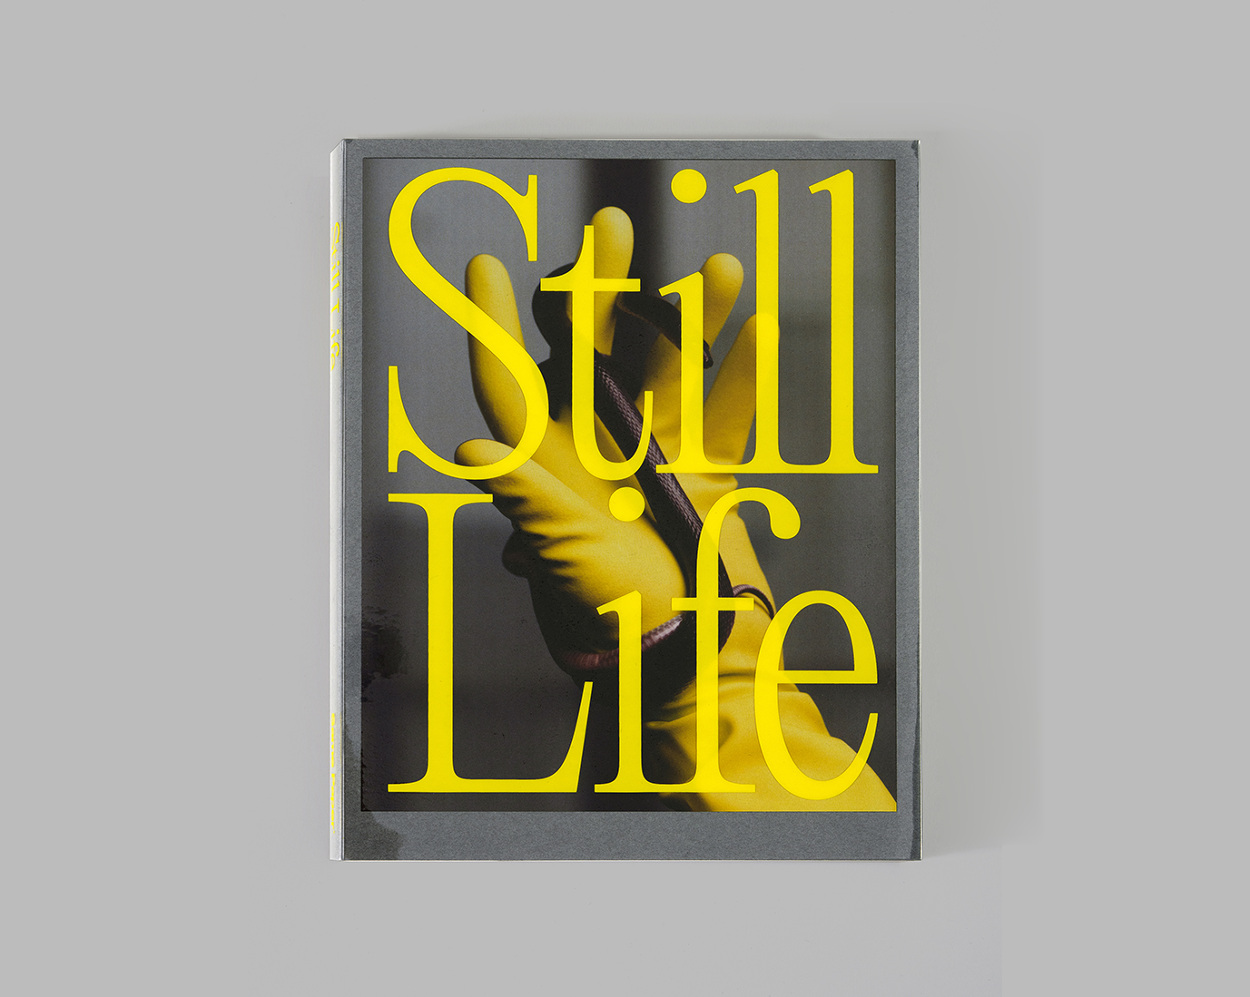 "Still Life," published by Same Paper.